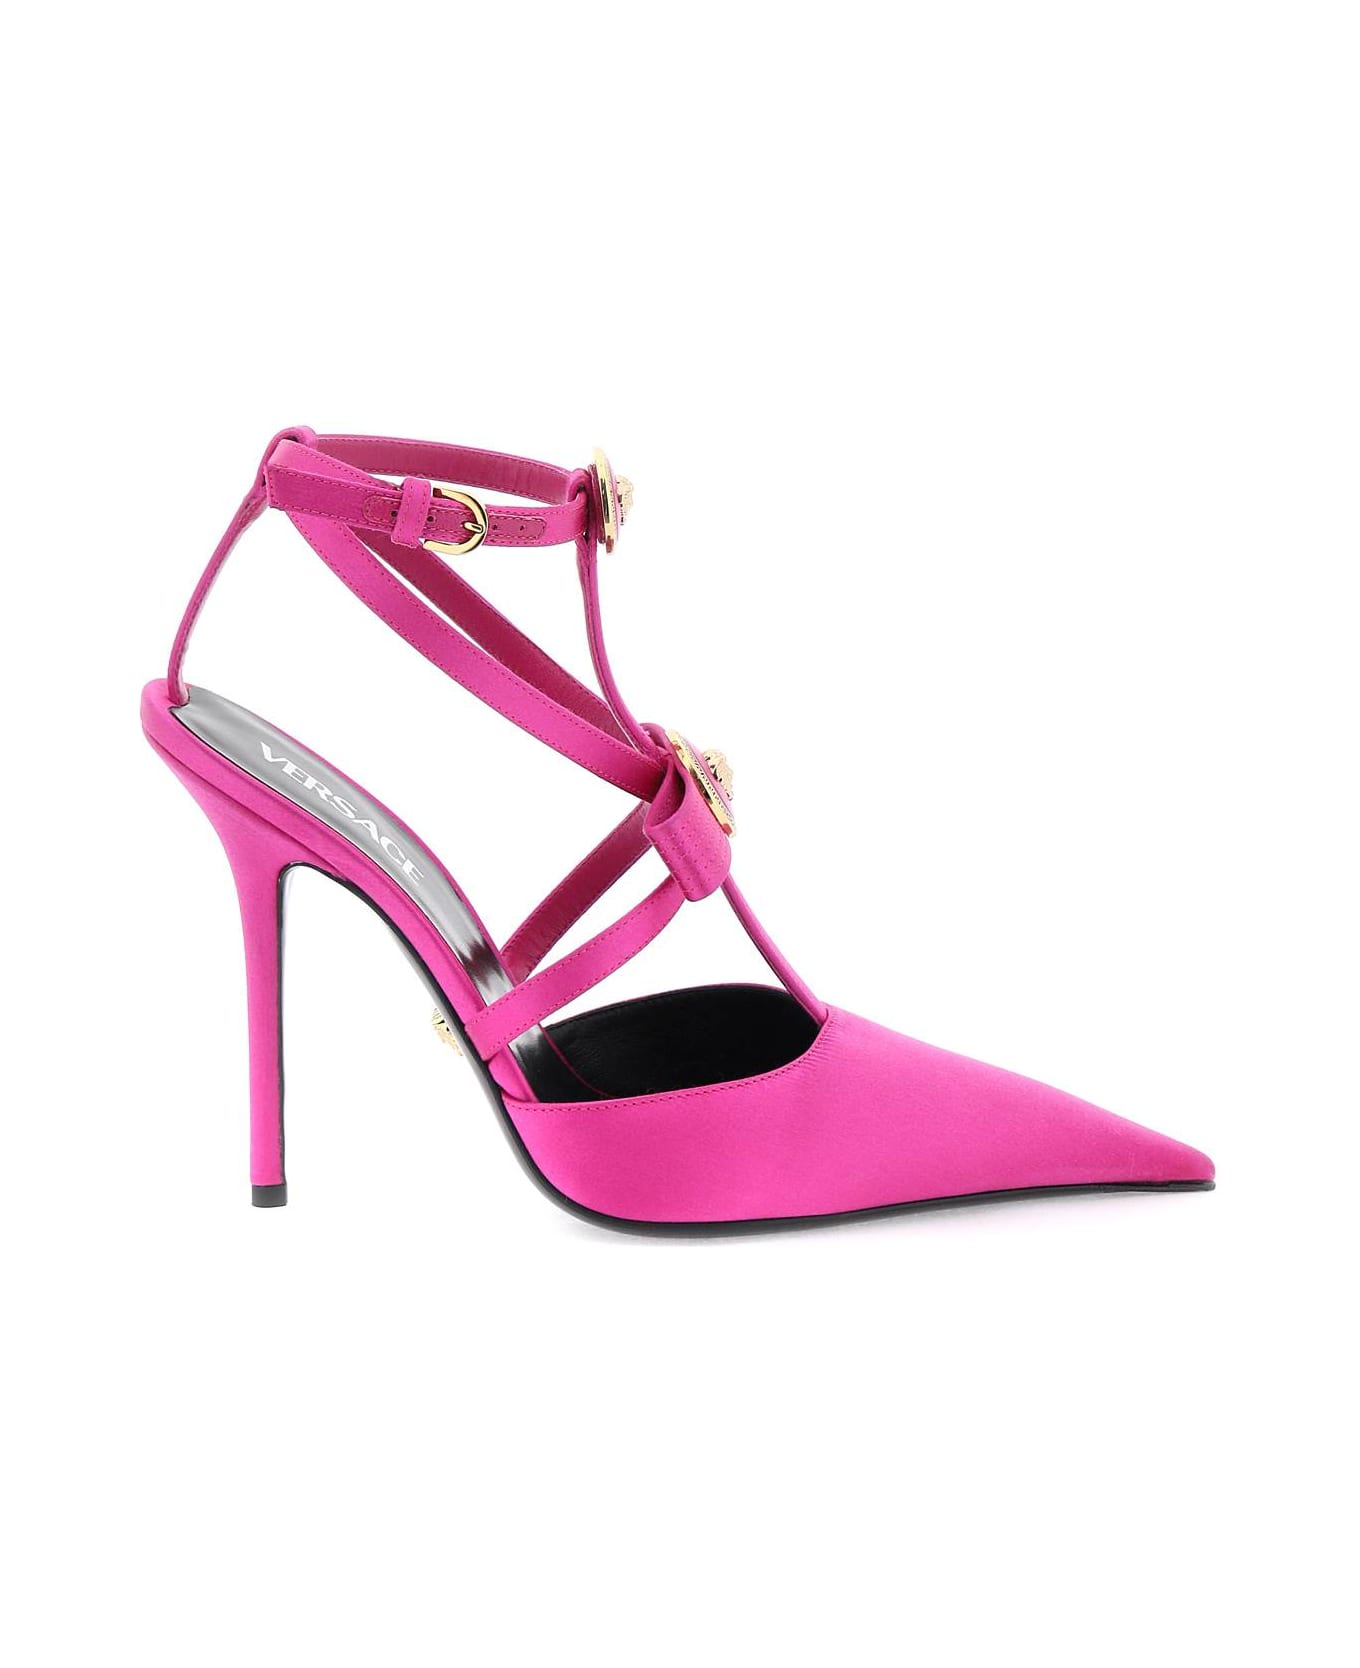 Versace Pumps With Gianni Ribbon Bows - WARTERLILY VERSACE GOLD (Fuchsia) ハイヒール